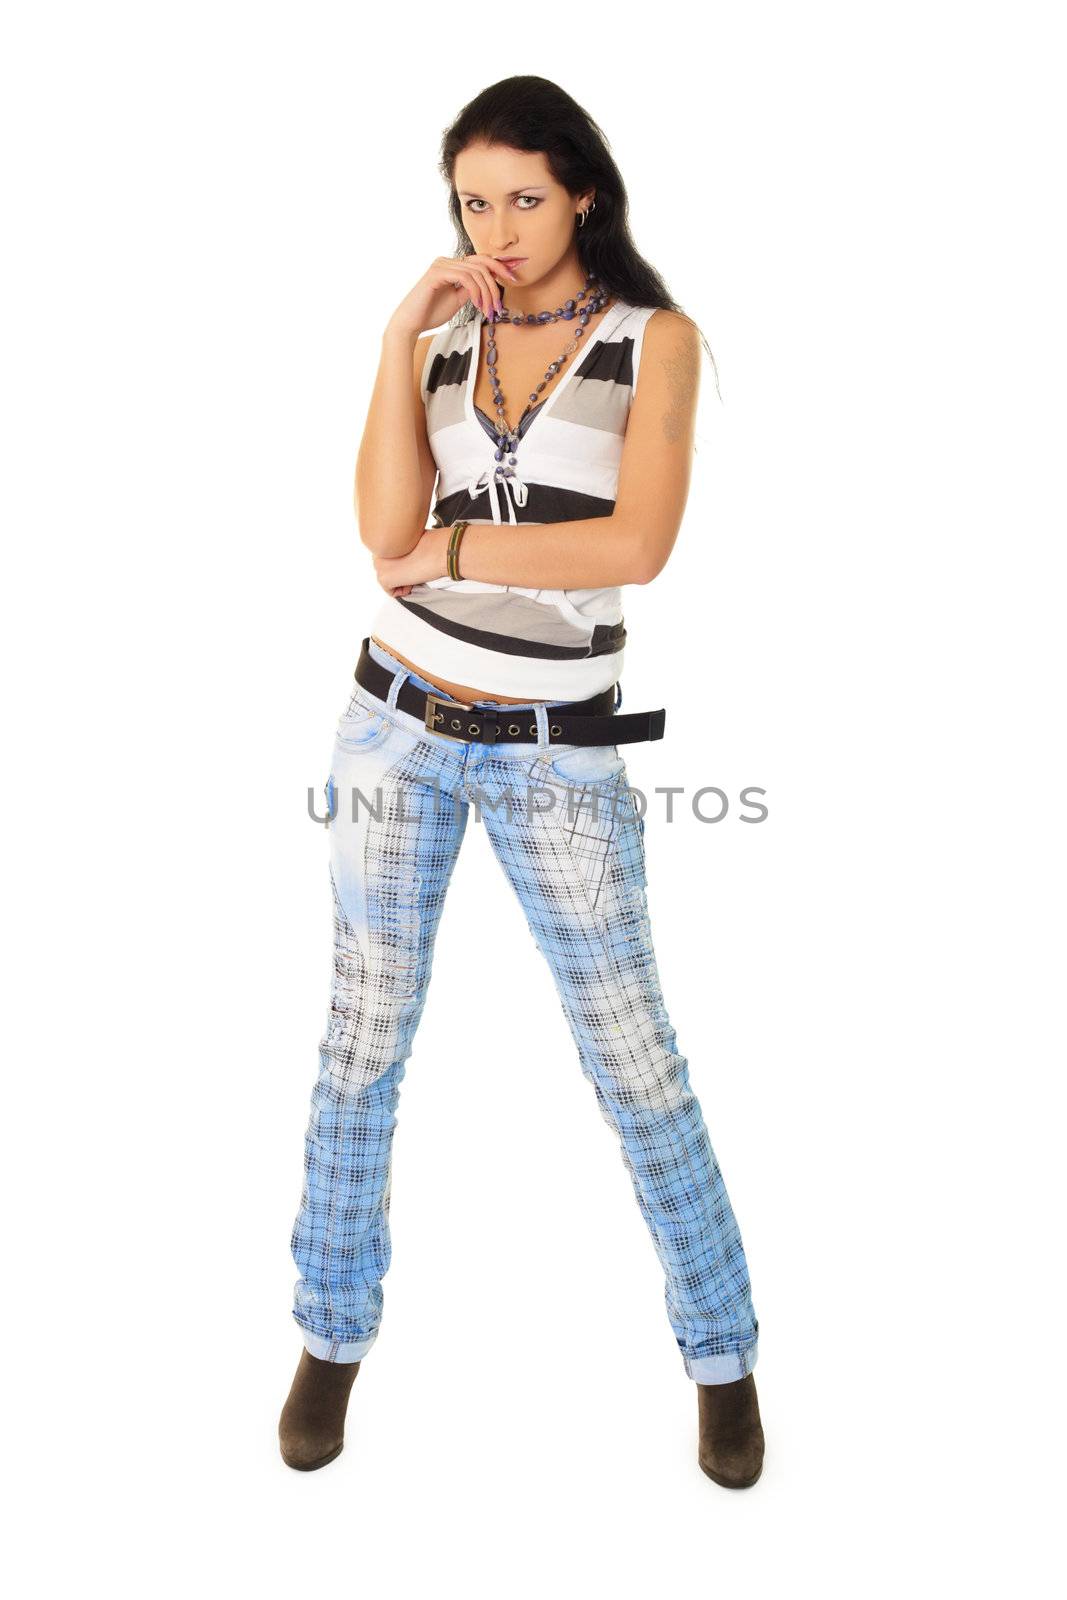 Fashionably dressed young woman in jeans isolated on a white background